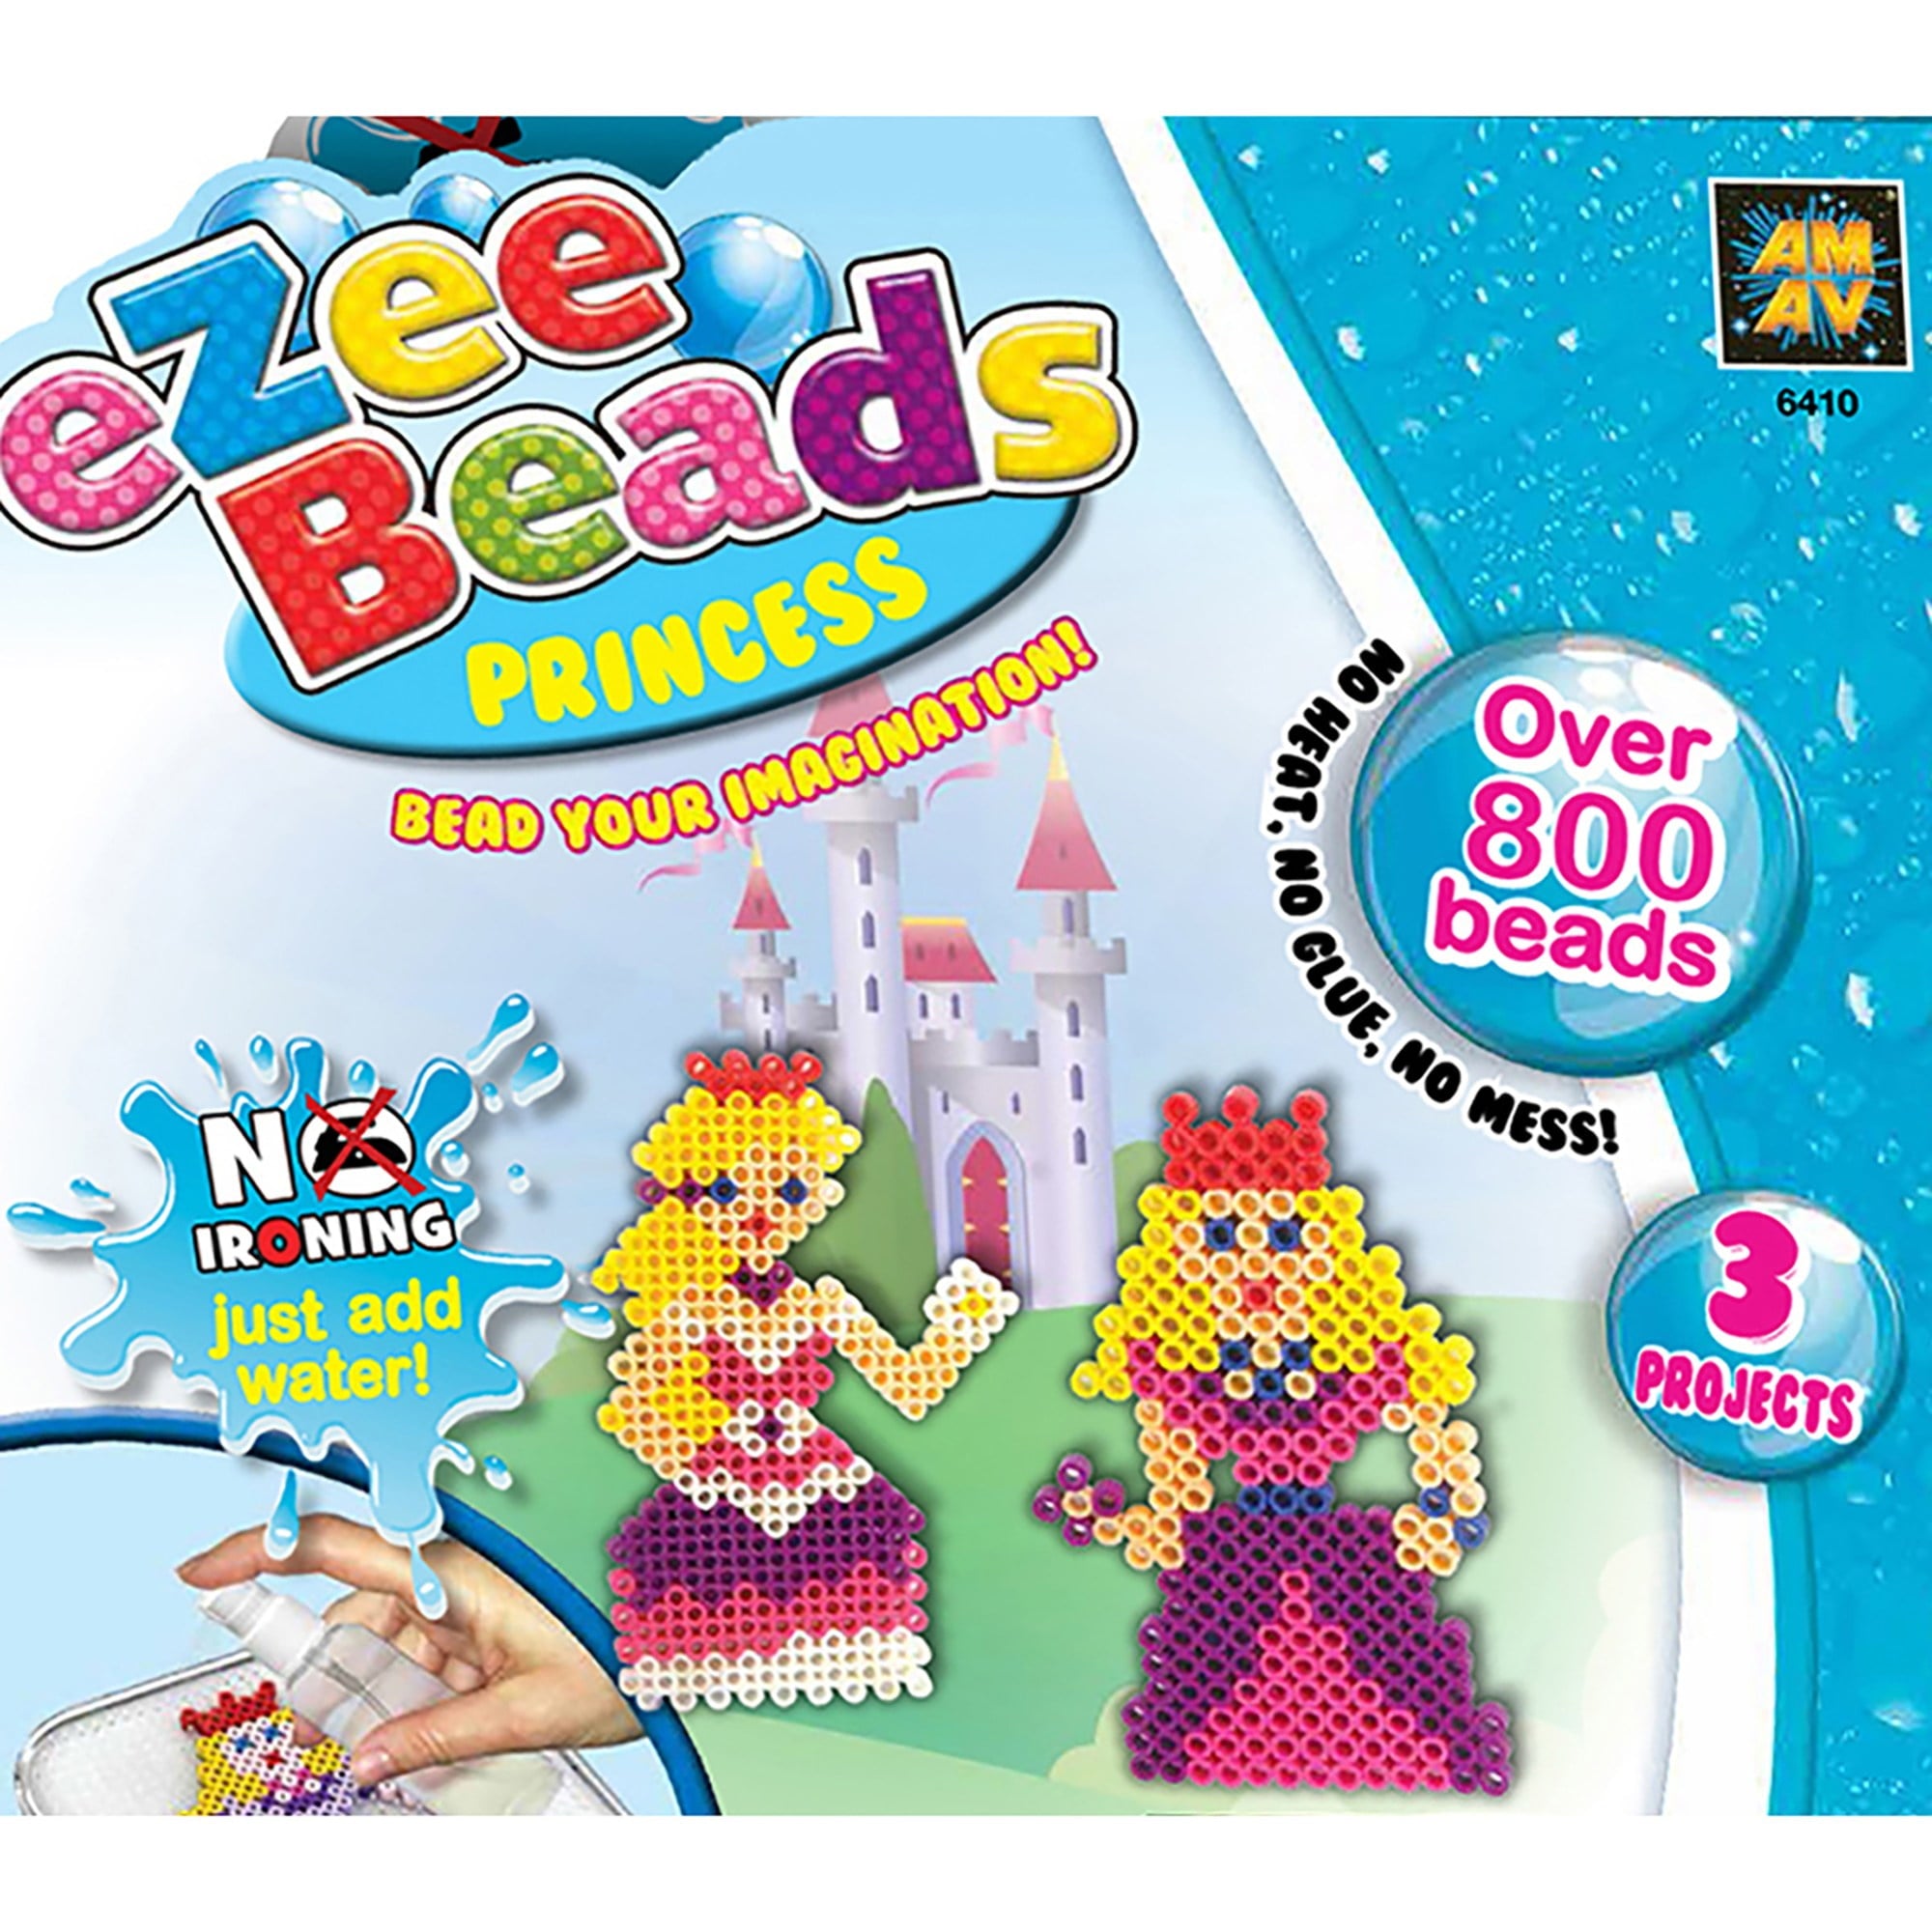 AMAV EZ Beads Princess-800 Beads Set, Craft Kit to Create Fun and Easy Bead Projects, Children Ages 5 and Up